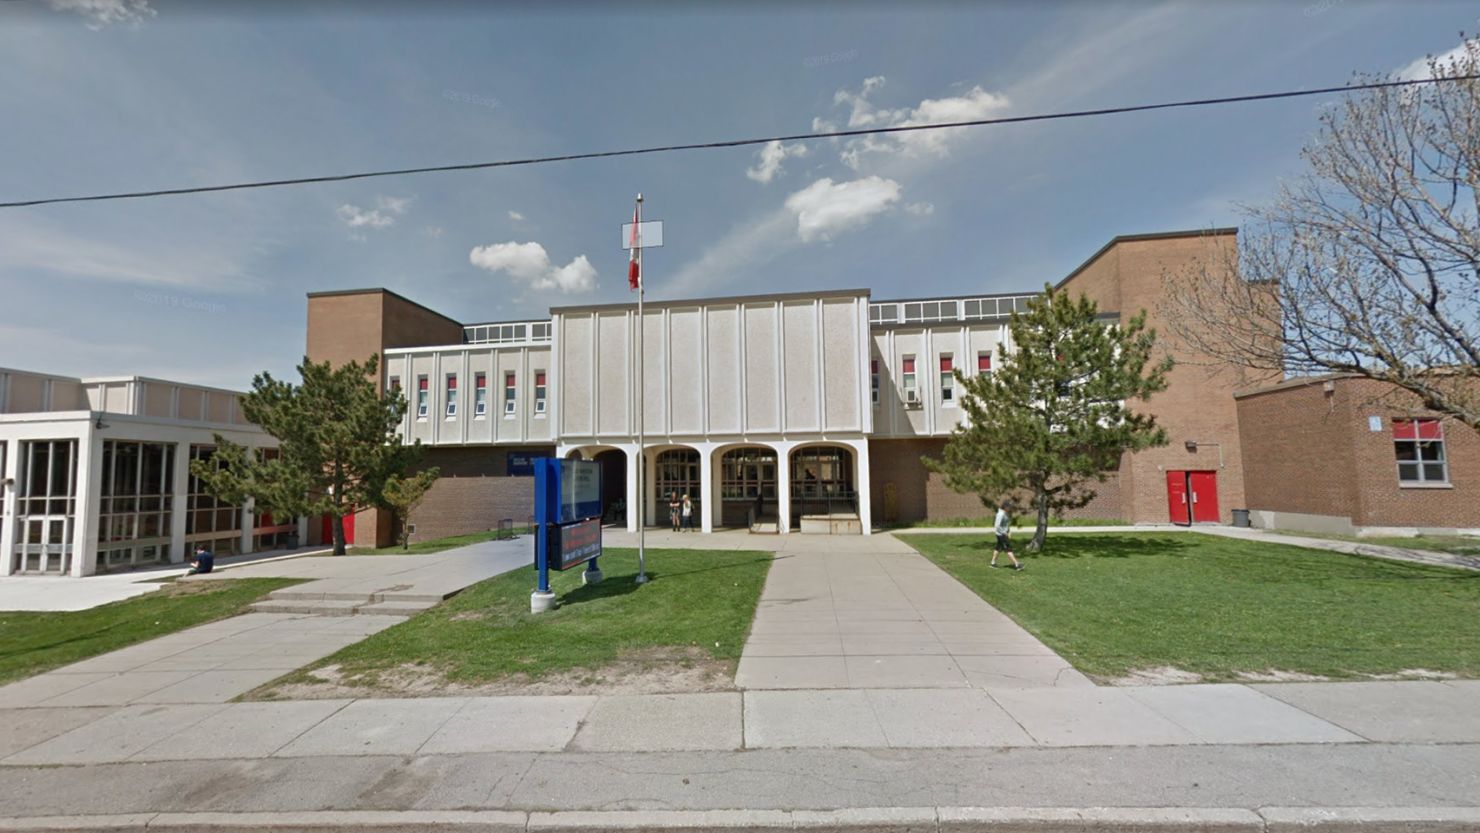 A 14-year-old boy was stabbed to death outside Sir Winston Churchill Secondary School in Hamilton, Ontario, Canada Monday.